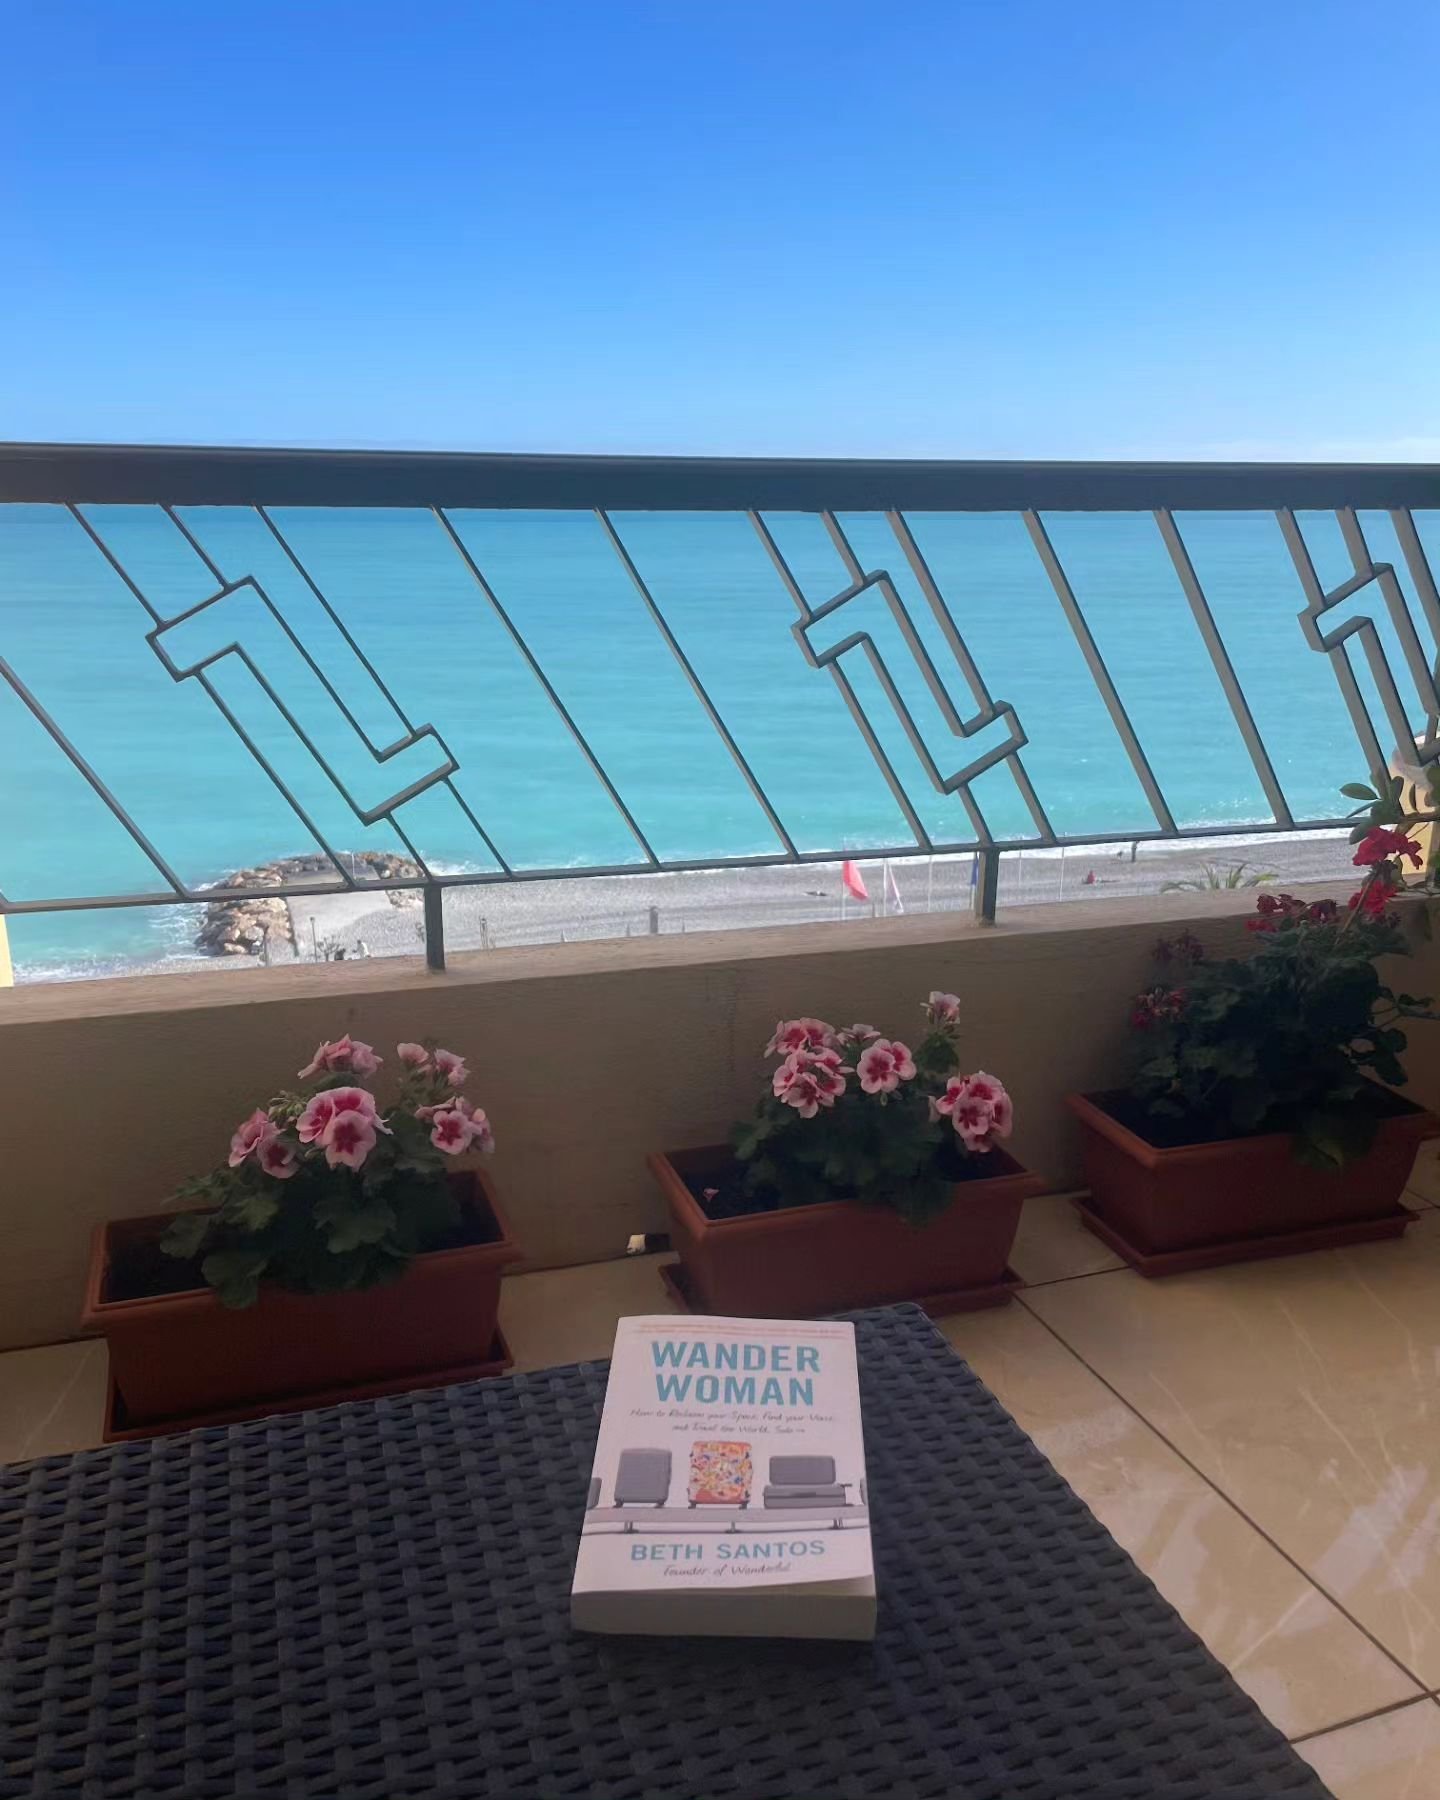 Just as the Uber pulled up to take her to the airport, my dear friend Allie received her copy of Wander Woman. She decided on a whim to take it along on her trip to Europe.

But she didn't just read it. 

The more she traveled, the more she decided t